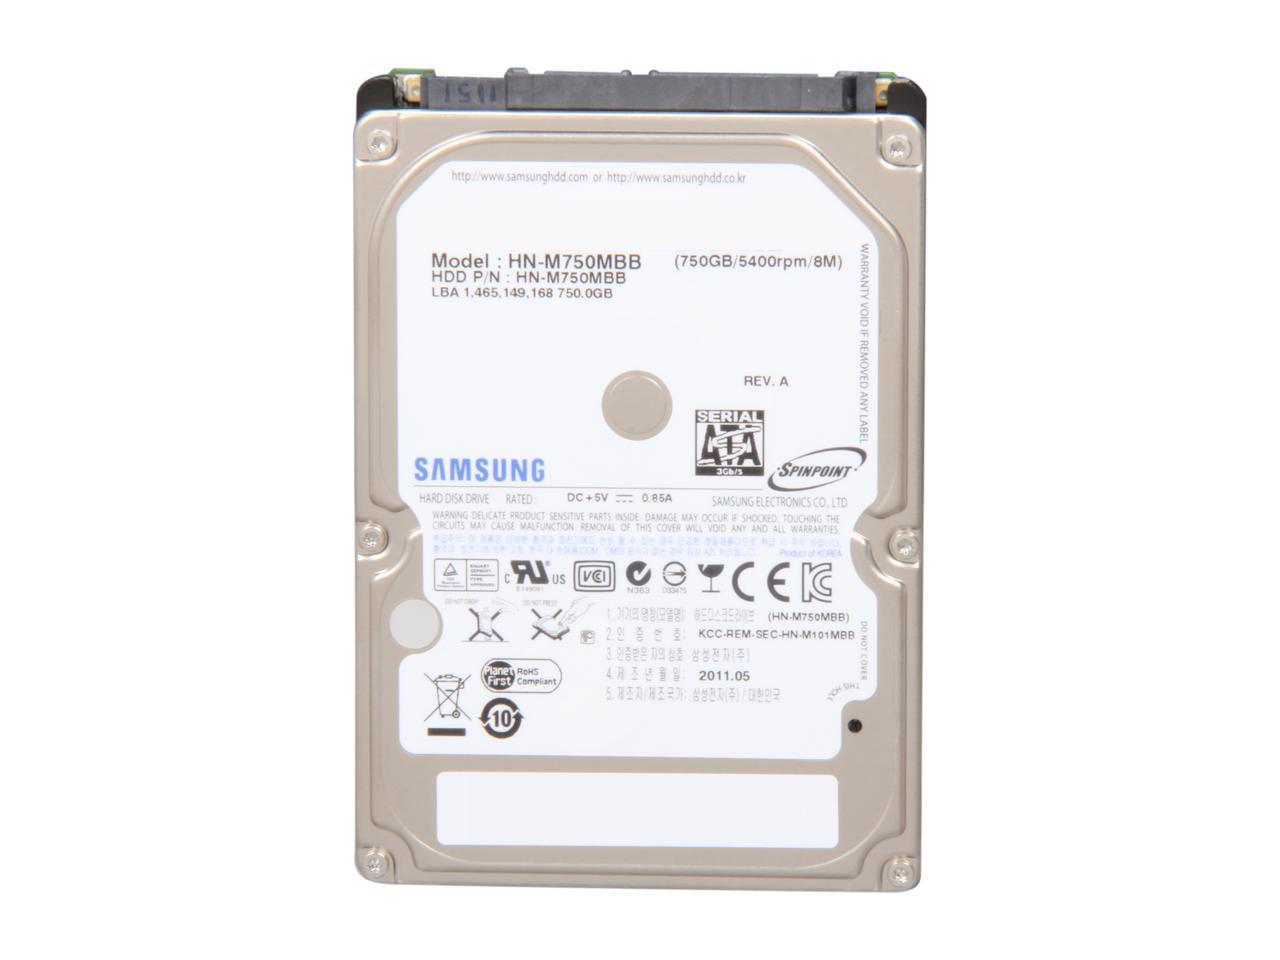 Seagate Samsung Spinpoint M8 St750Lm022(Hn-M750Mbb) 750Gb 5400 Rpm 8Mb Cache Sata 3.0Gb/S 2.5" Internal Notebook Hard Drive Bare Drive